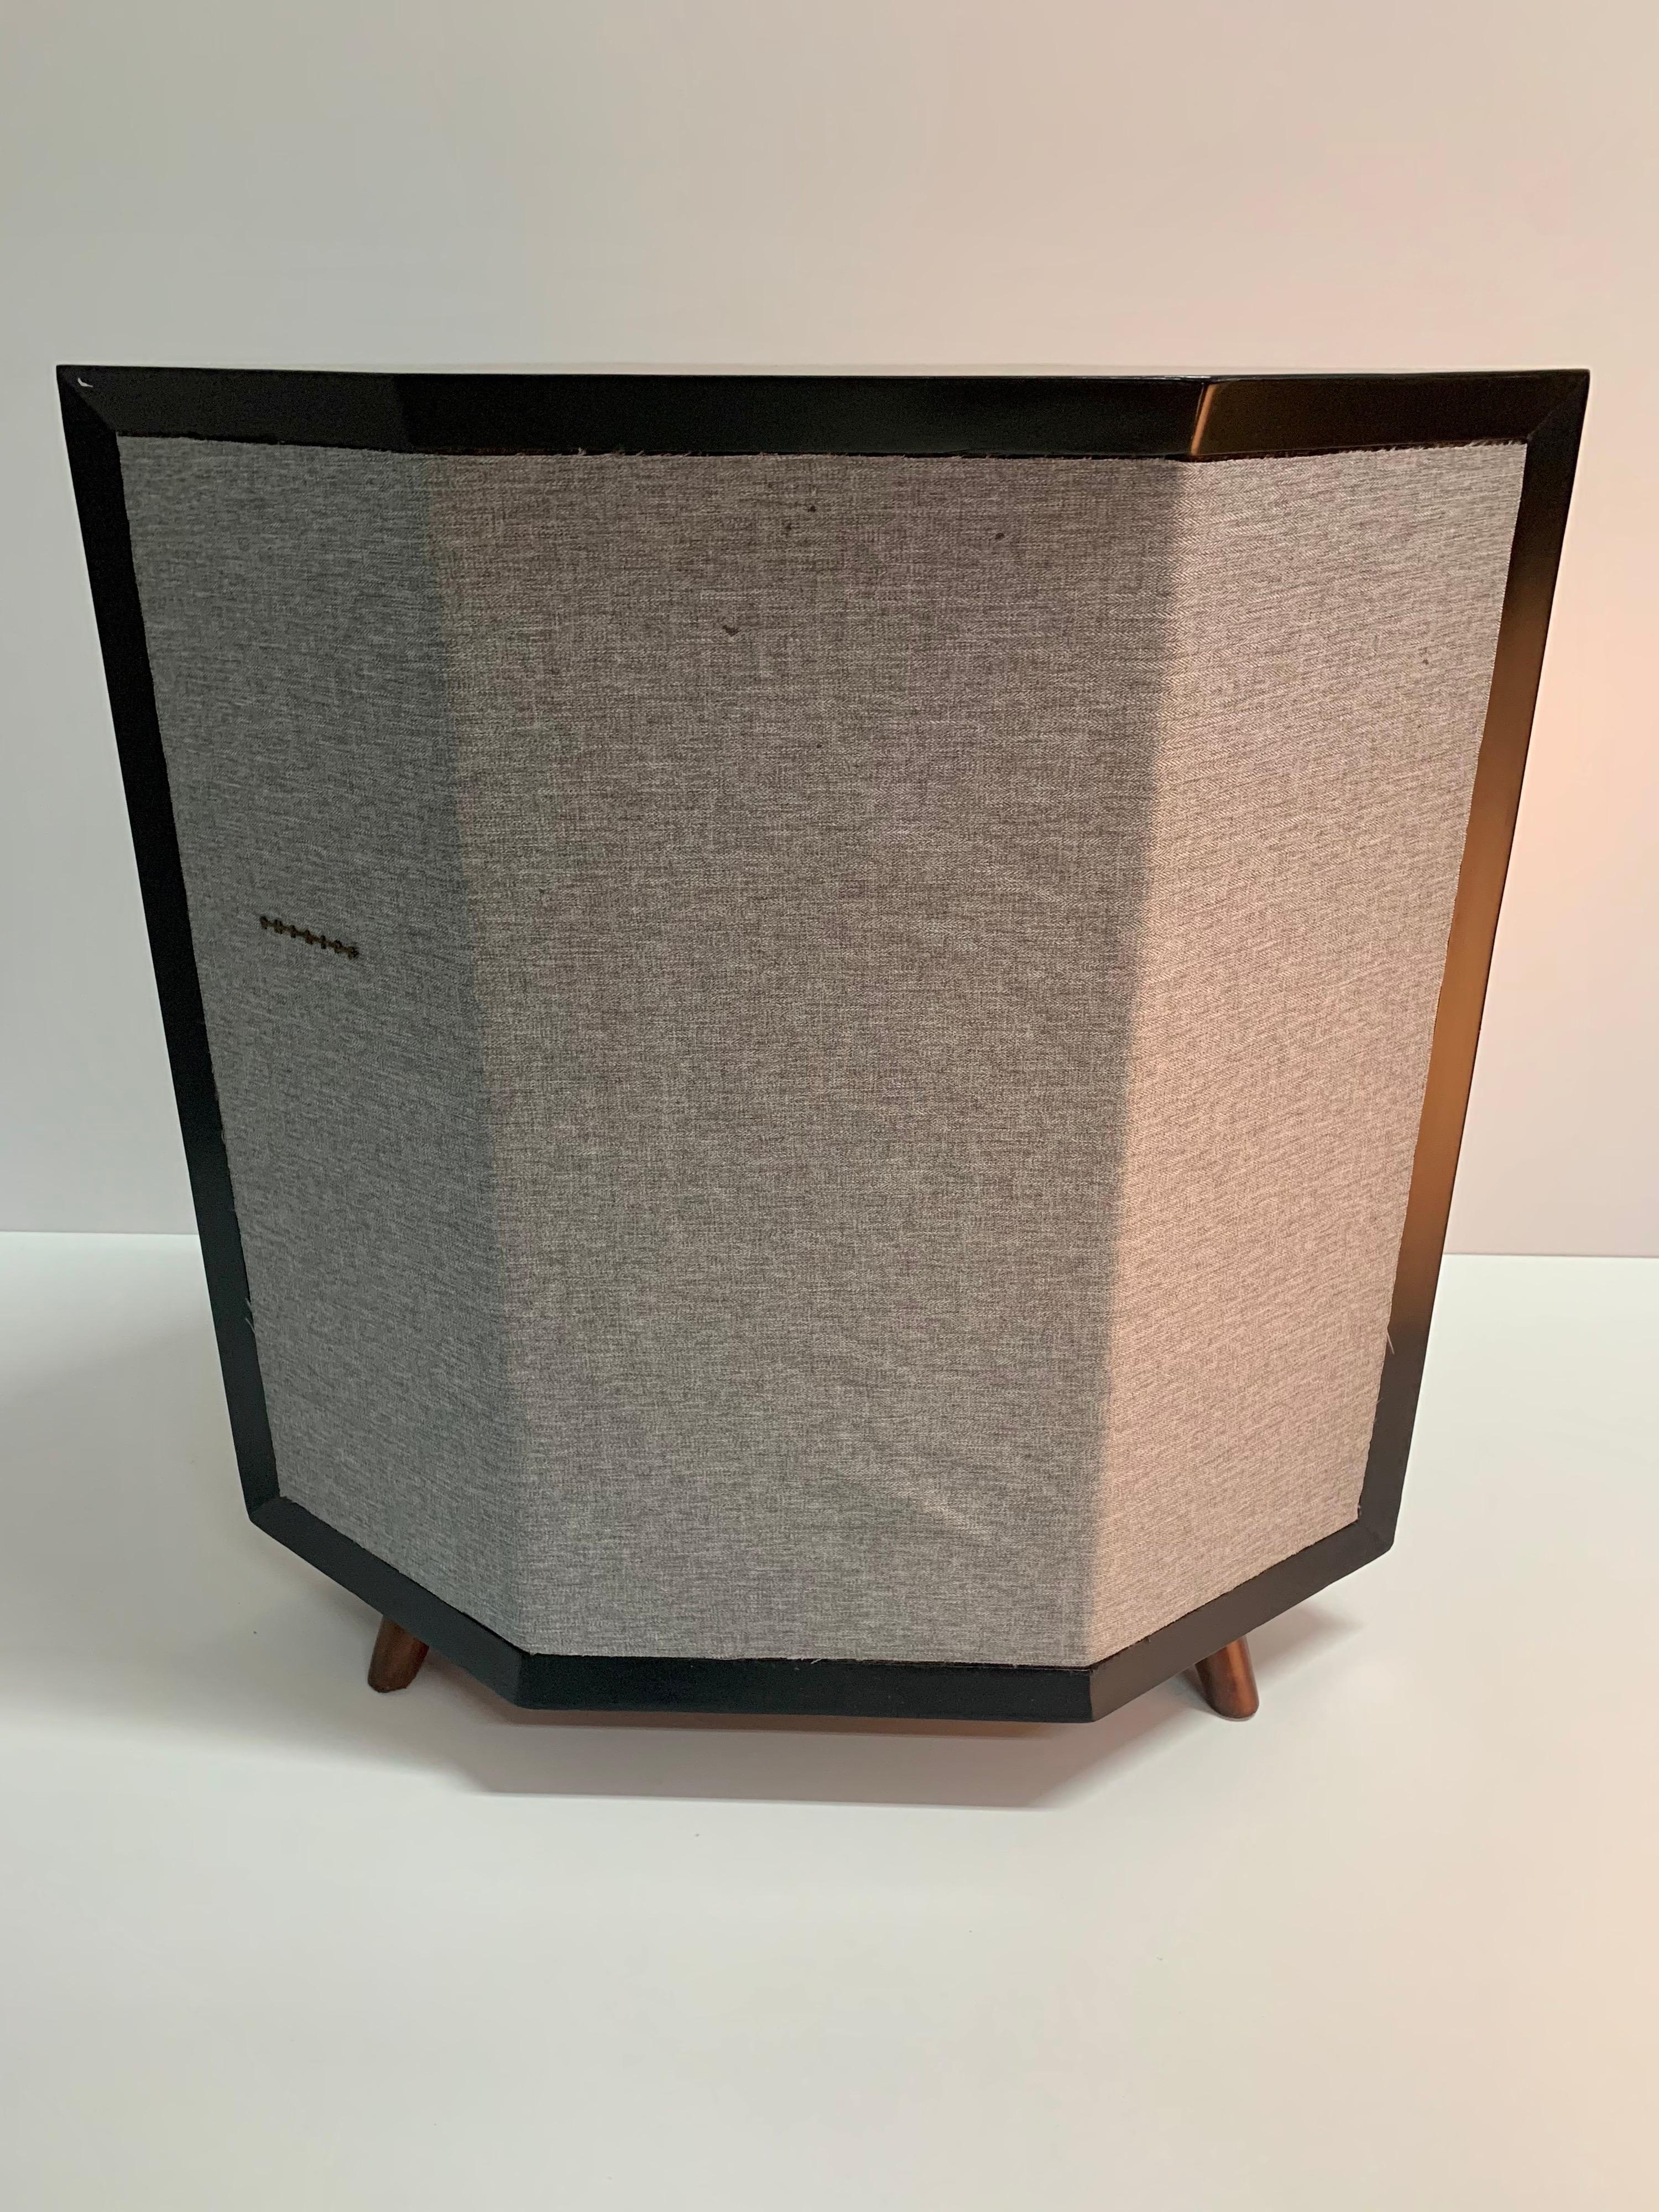 Philips brand, it has no audio speakers inside, it's just the cabinet already professionally restored on the outside, the previous fabric we couldn't remove and put a new fabric on top of it. This piece is a complement to one of the consoles we have